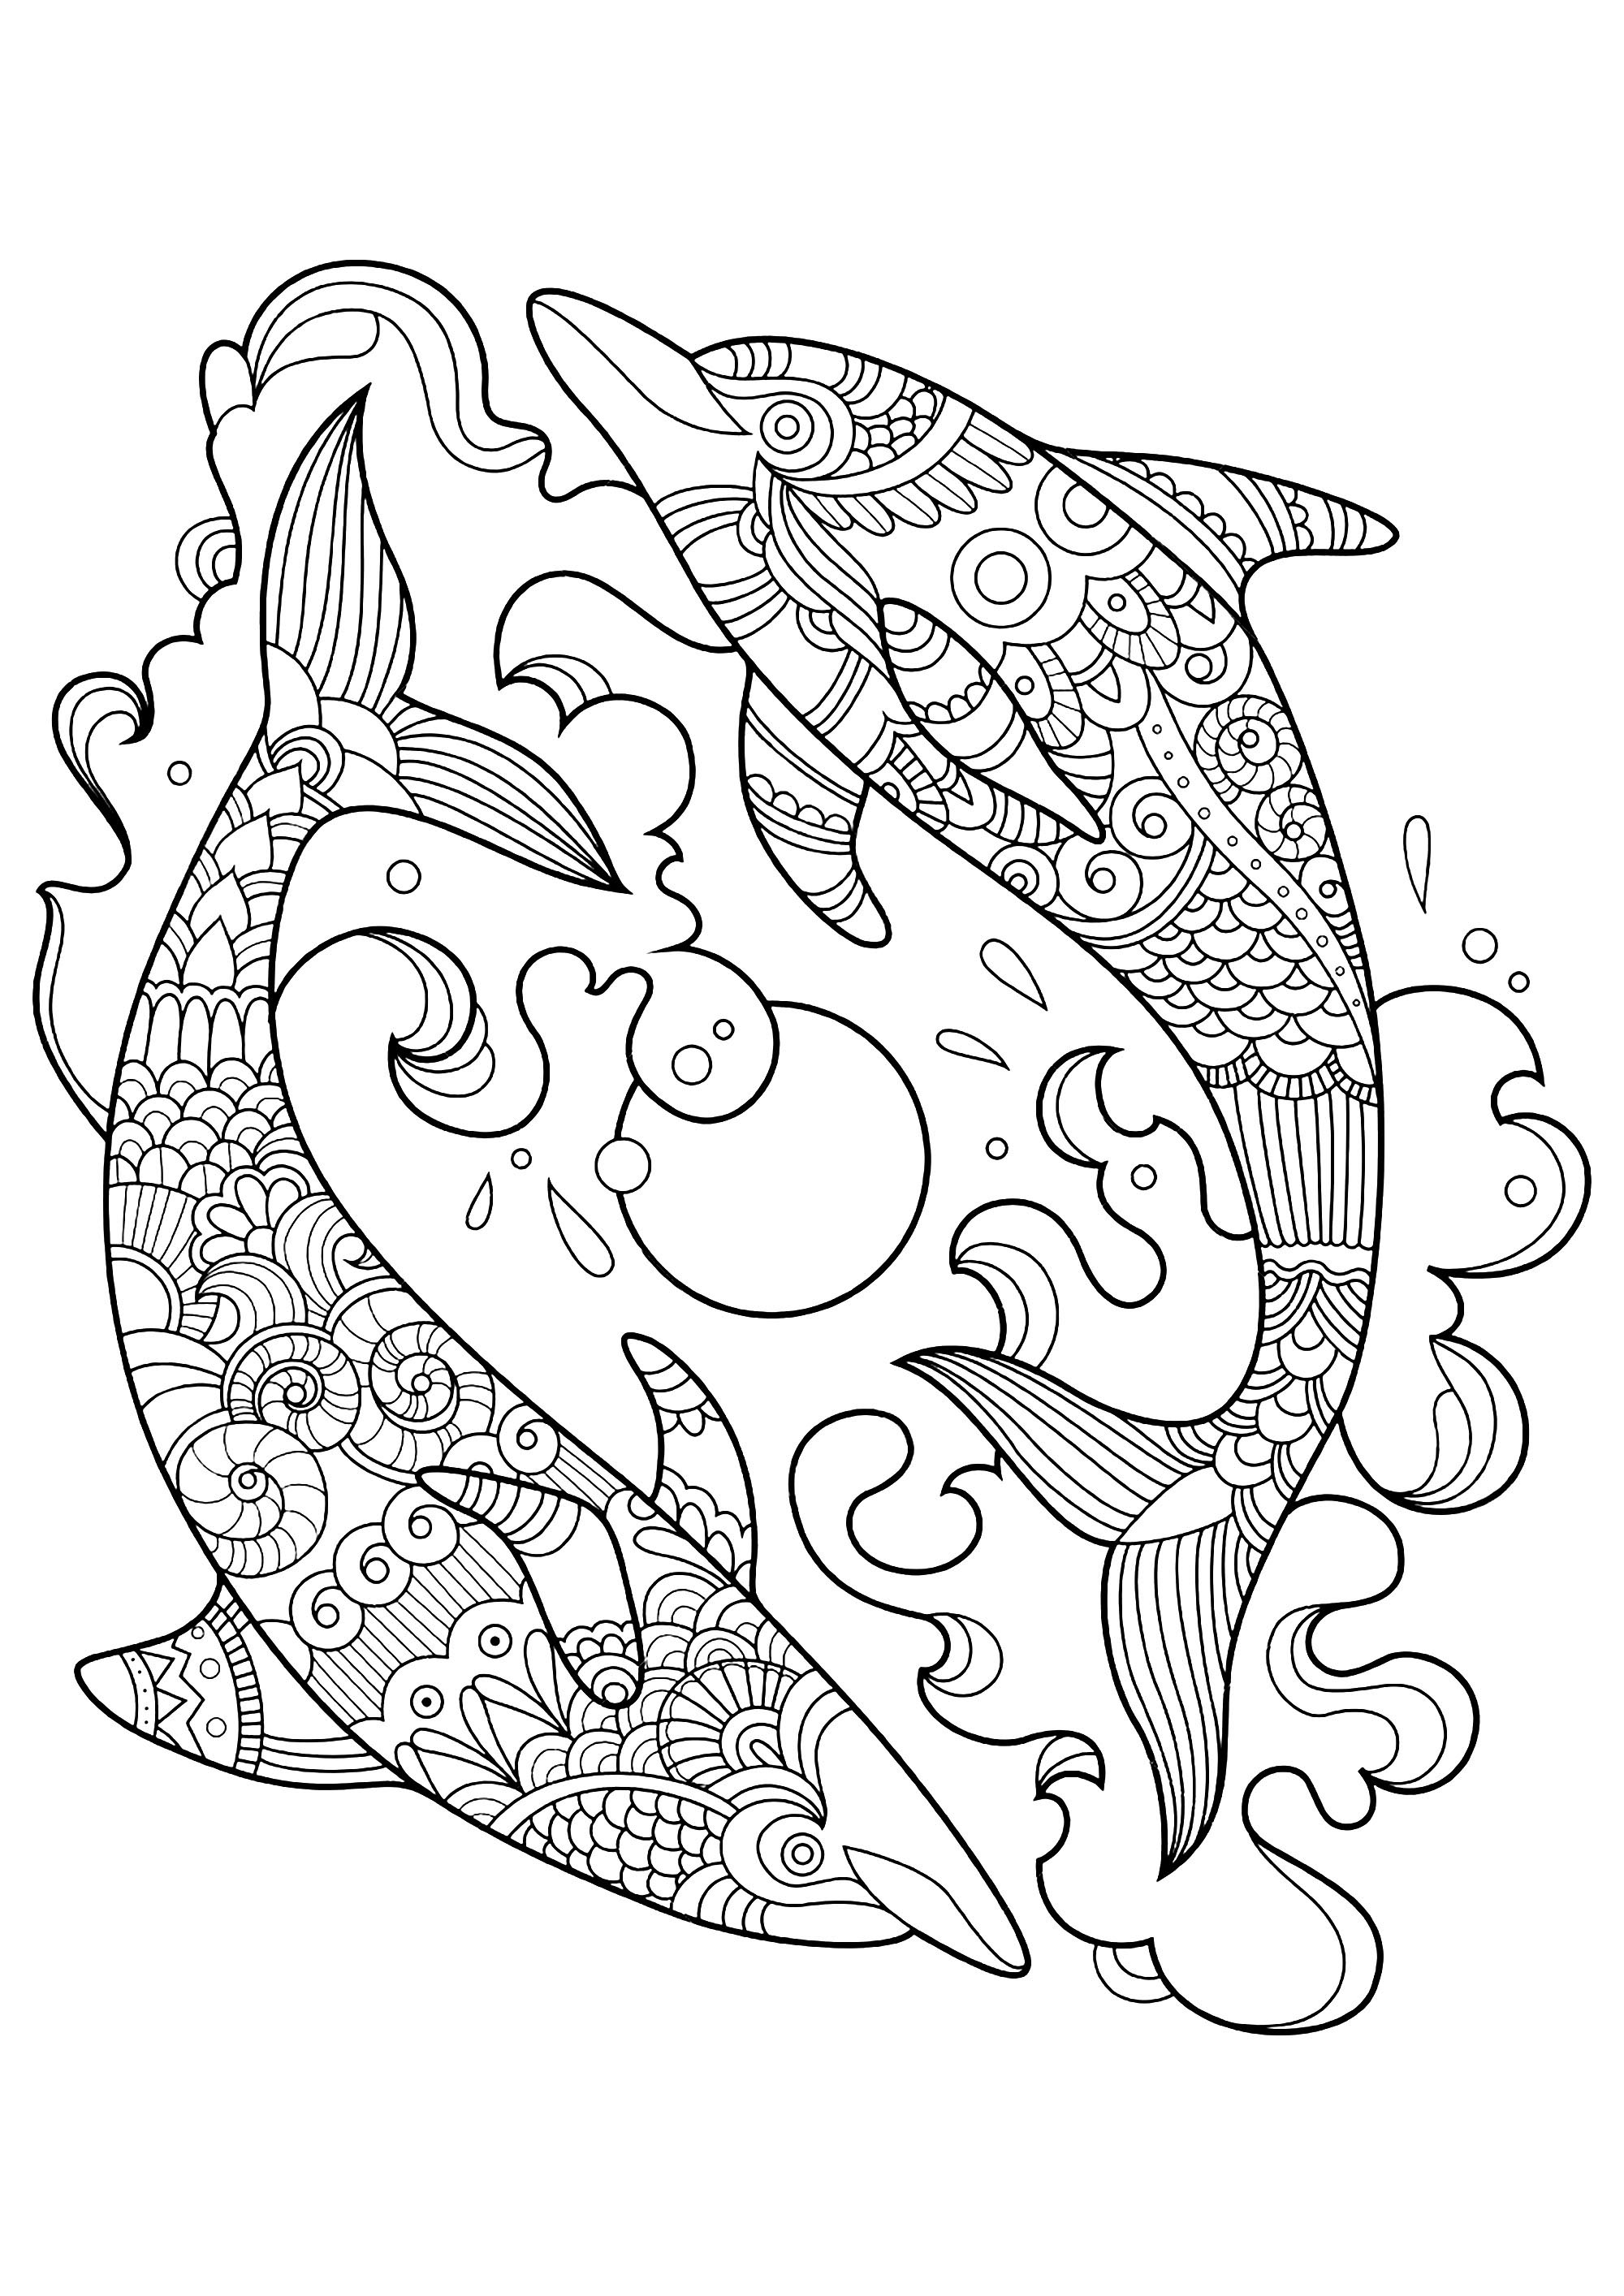 dolphin coloring printables free printable dolphin coloring pages for kids printables coloring dolphin 